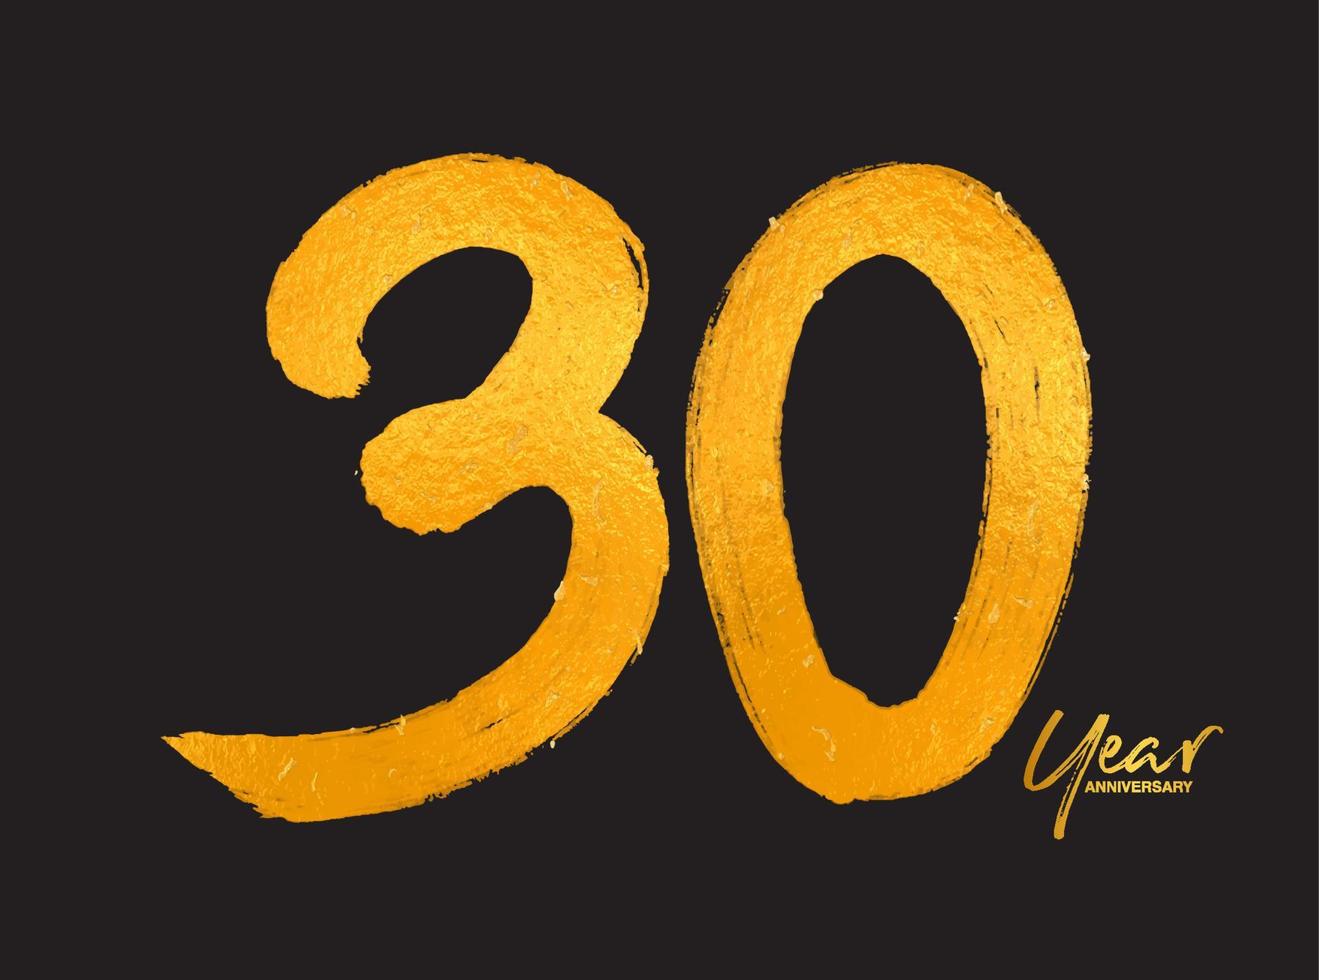 Gold 30 Years Anniversary Celebration Vector Template, 30 Years  logo design, 30th birthday, Gold Lettering Numbers brush drawing hand drawn sketch, number logo design vector illustration